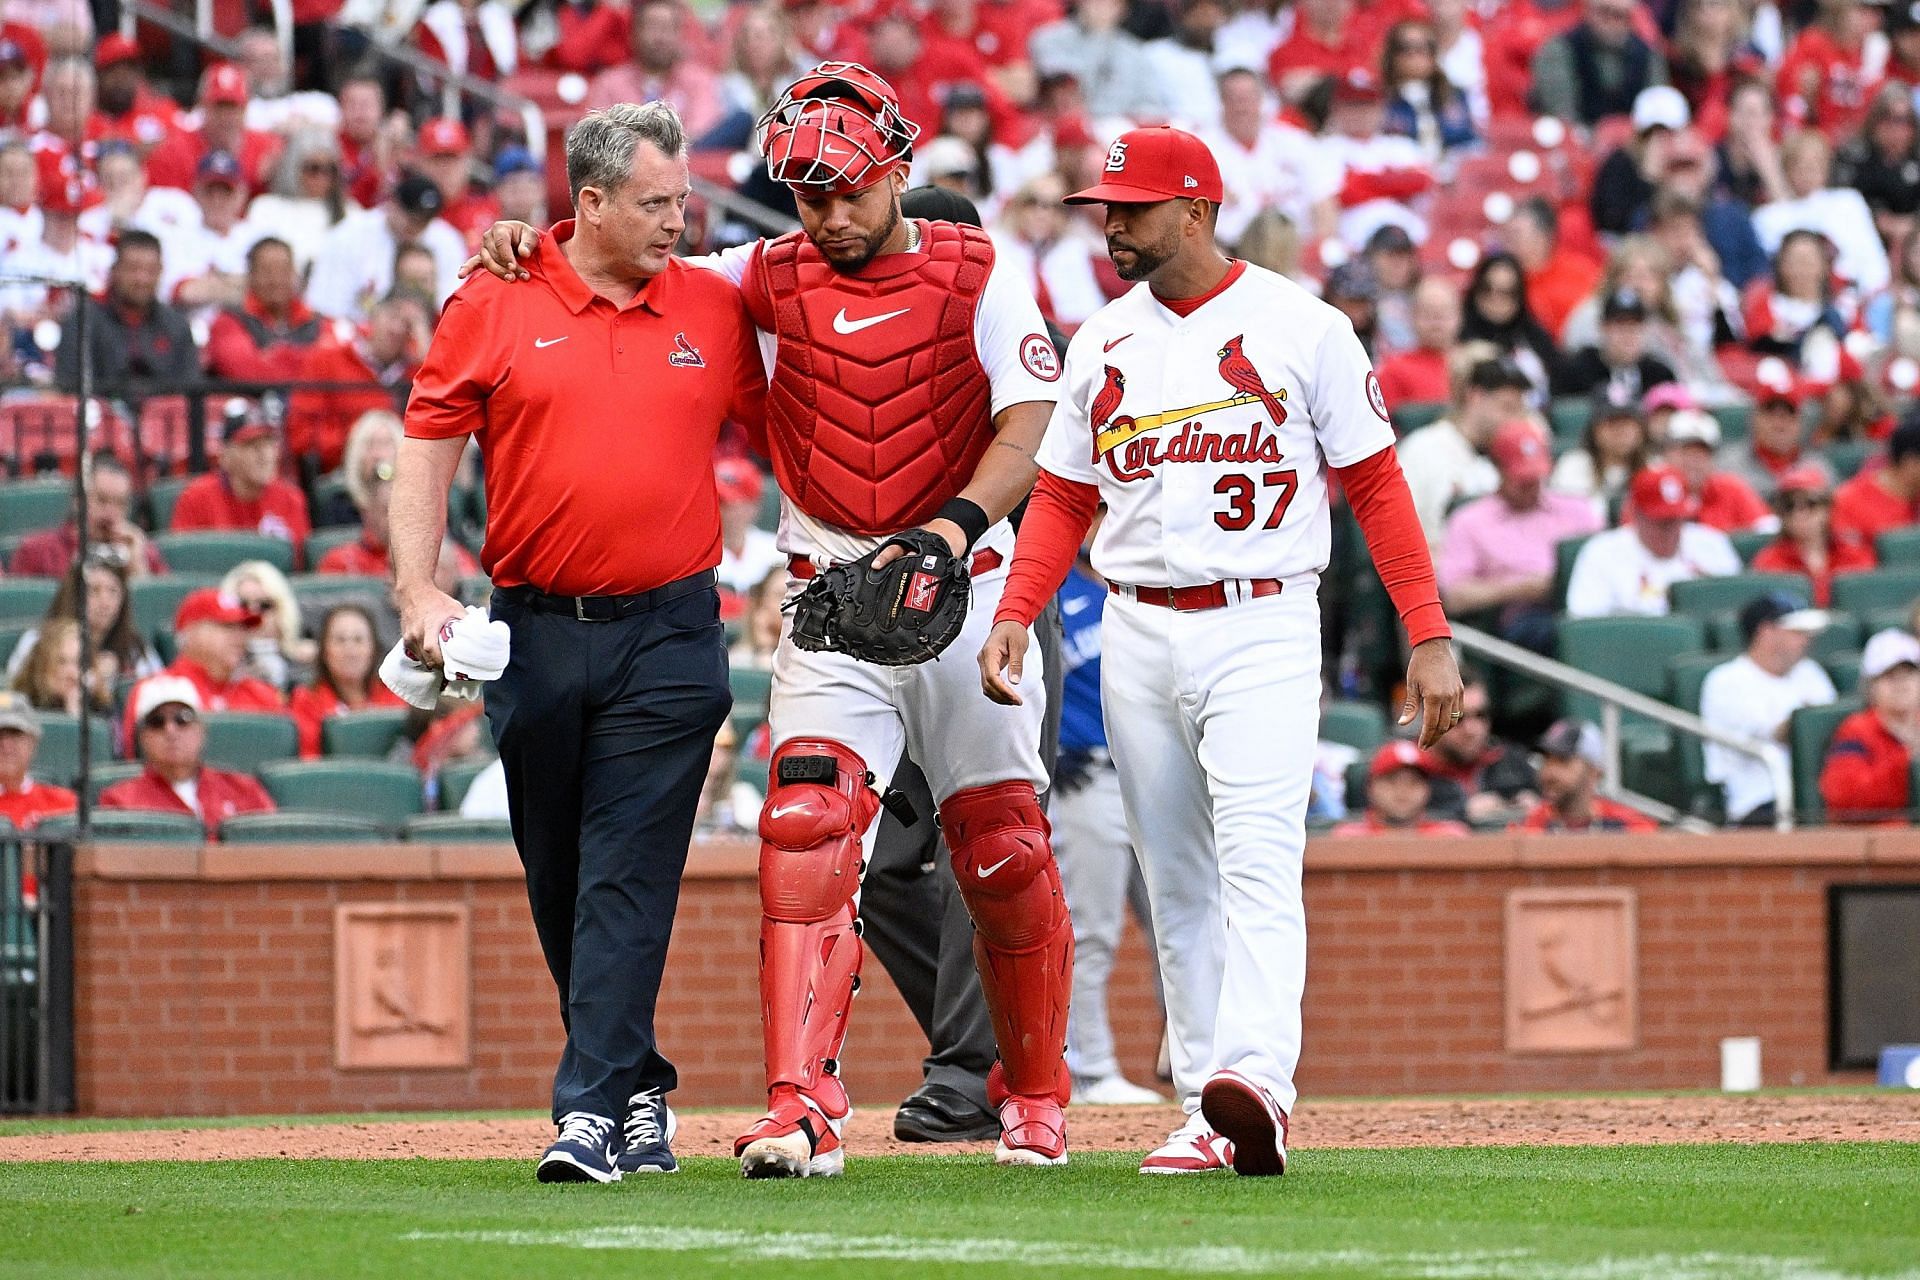 St. Louis Cardinals fans relieved by report Willson Contreras avoided major  injury after leaving game early: Whew!! Dodged a literal bullet